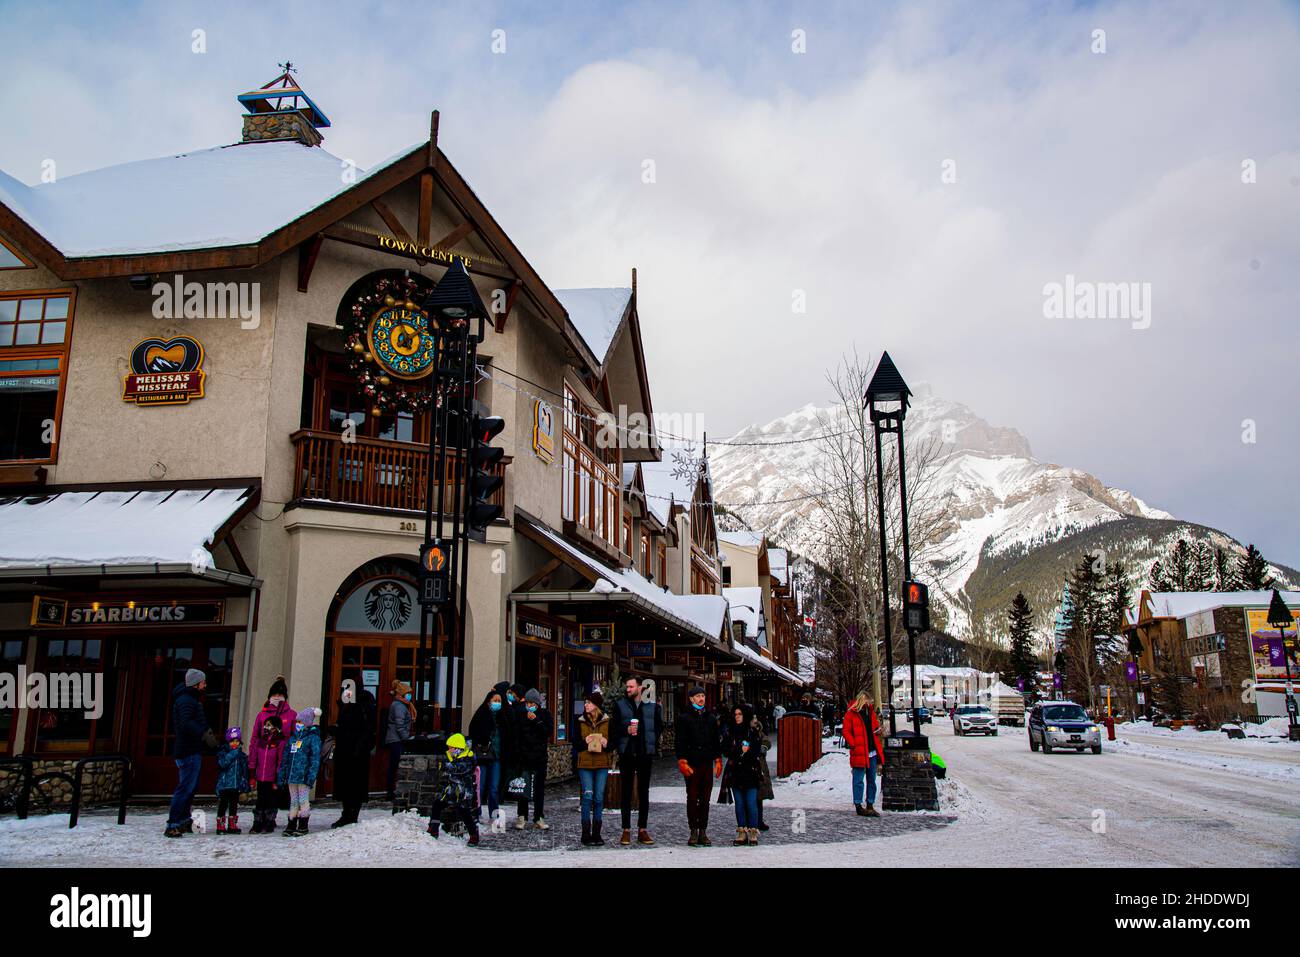 Banff Canada Dec 22 2021 Downtown Banff Winter Christmas View With